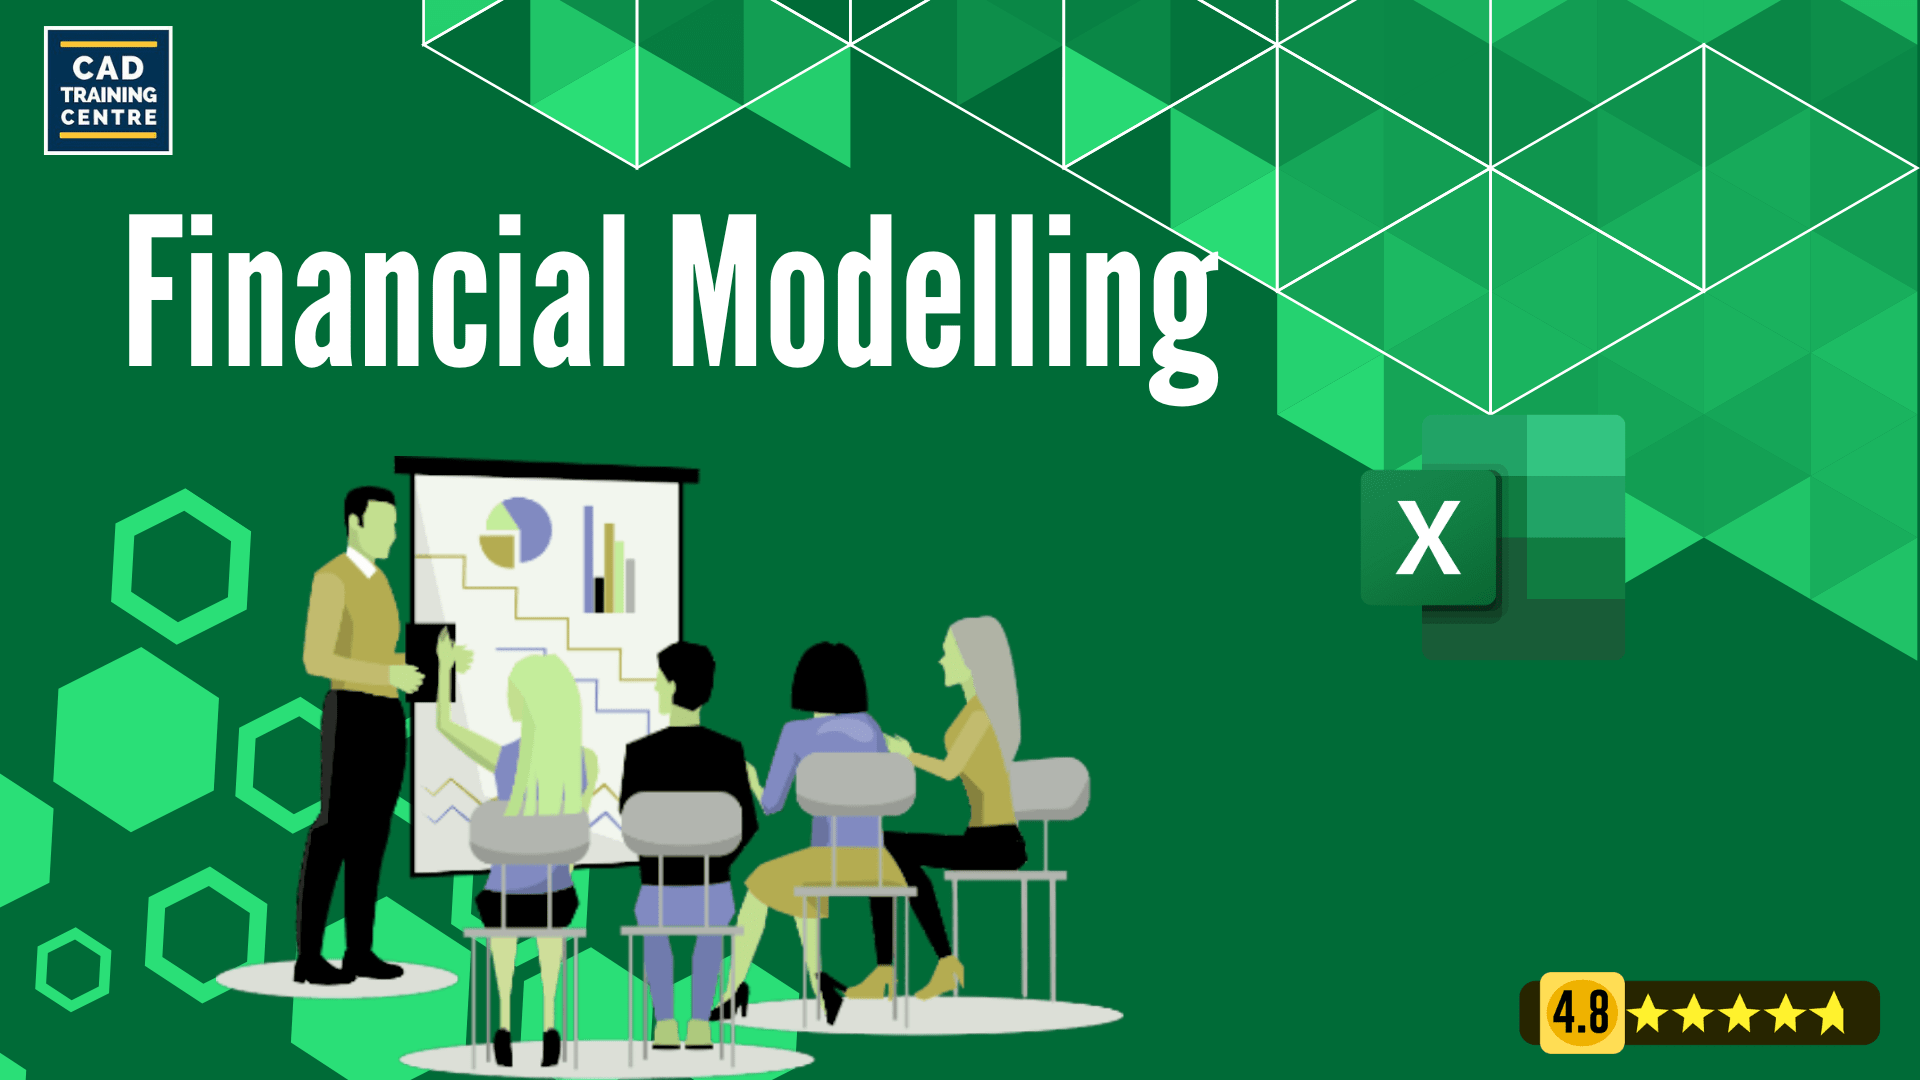 Come and learn financial modelling